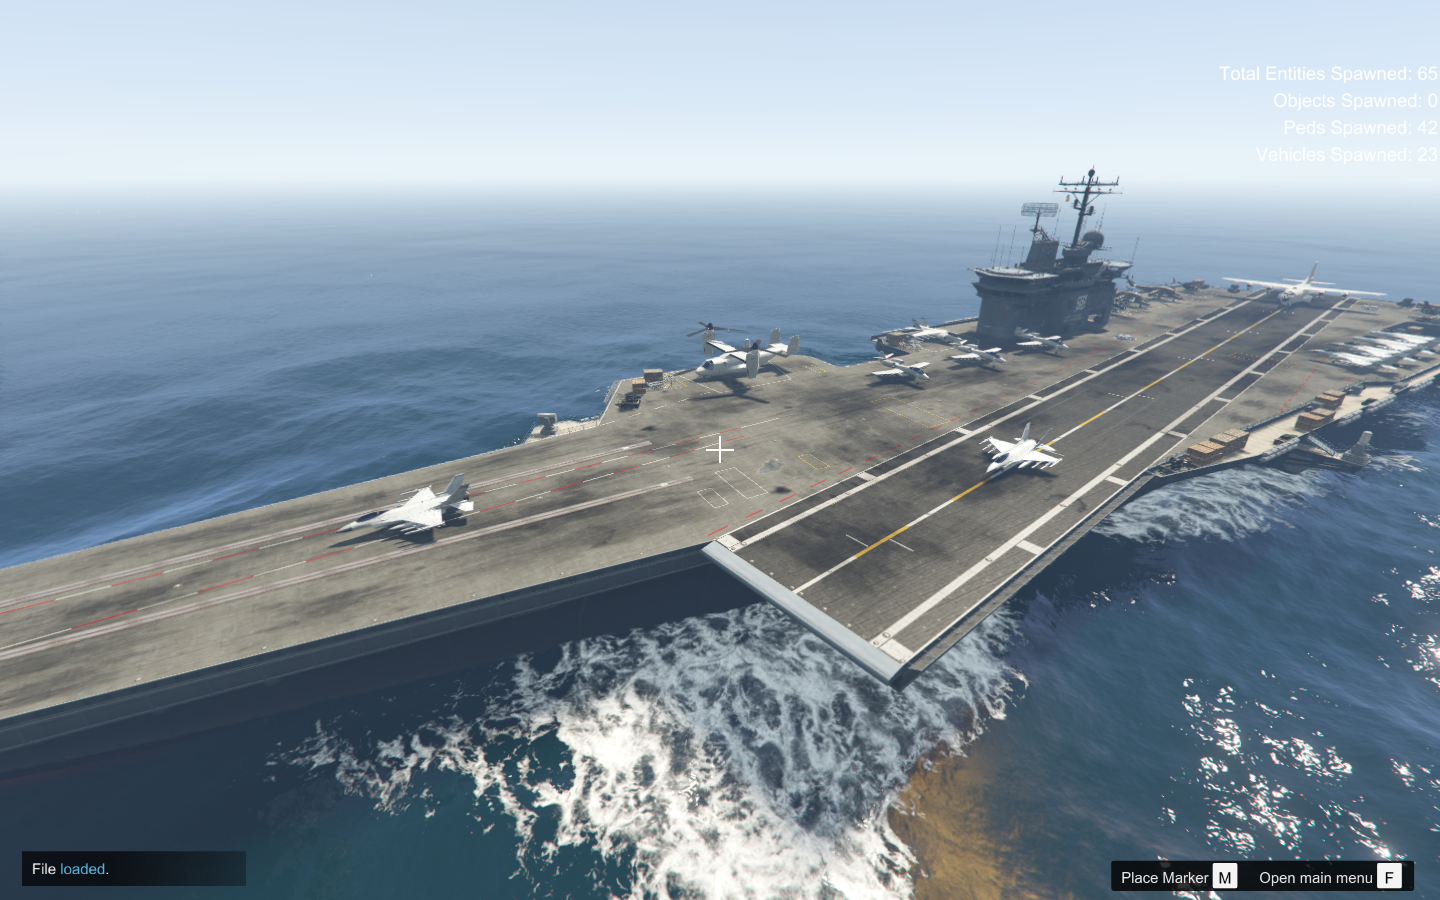 when is the aircraft carrier update come out world of warships?